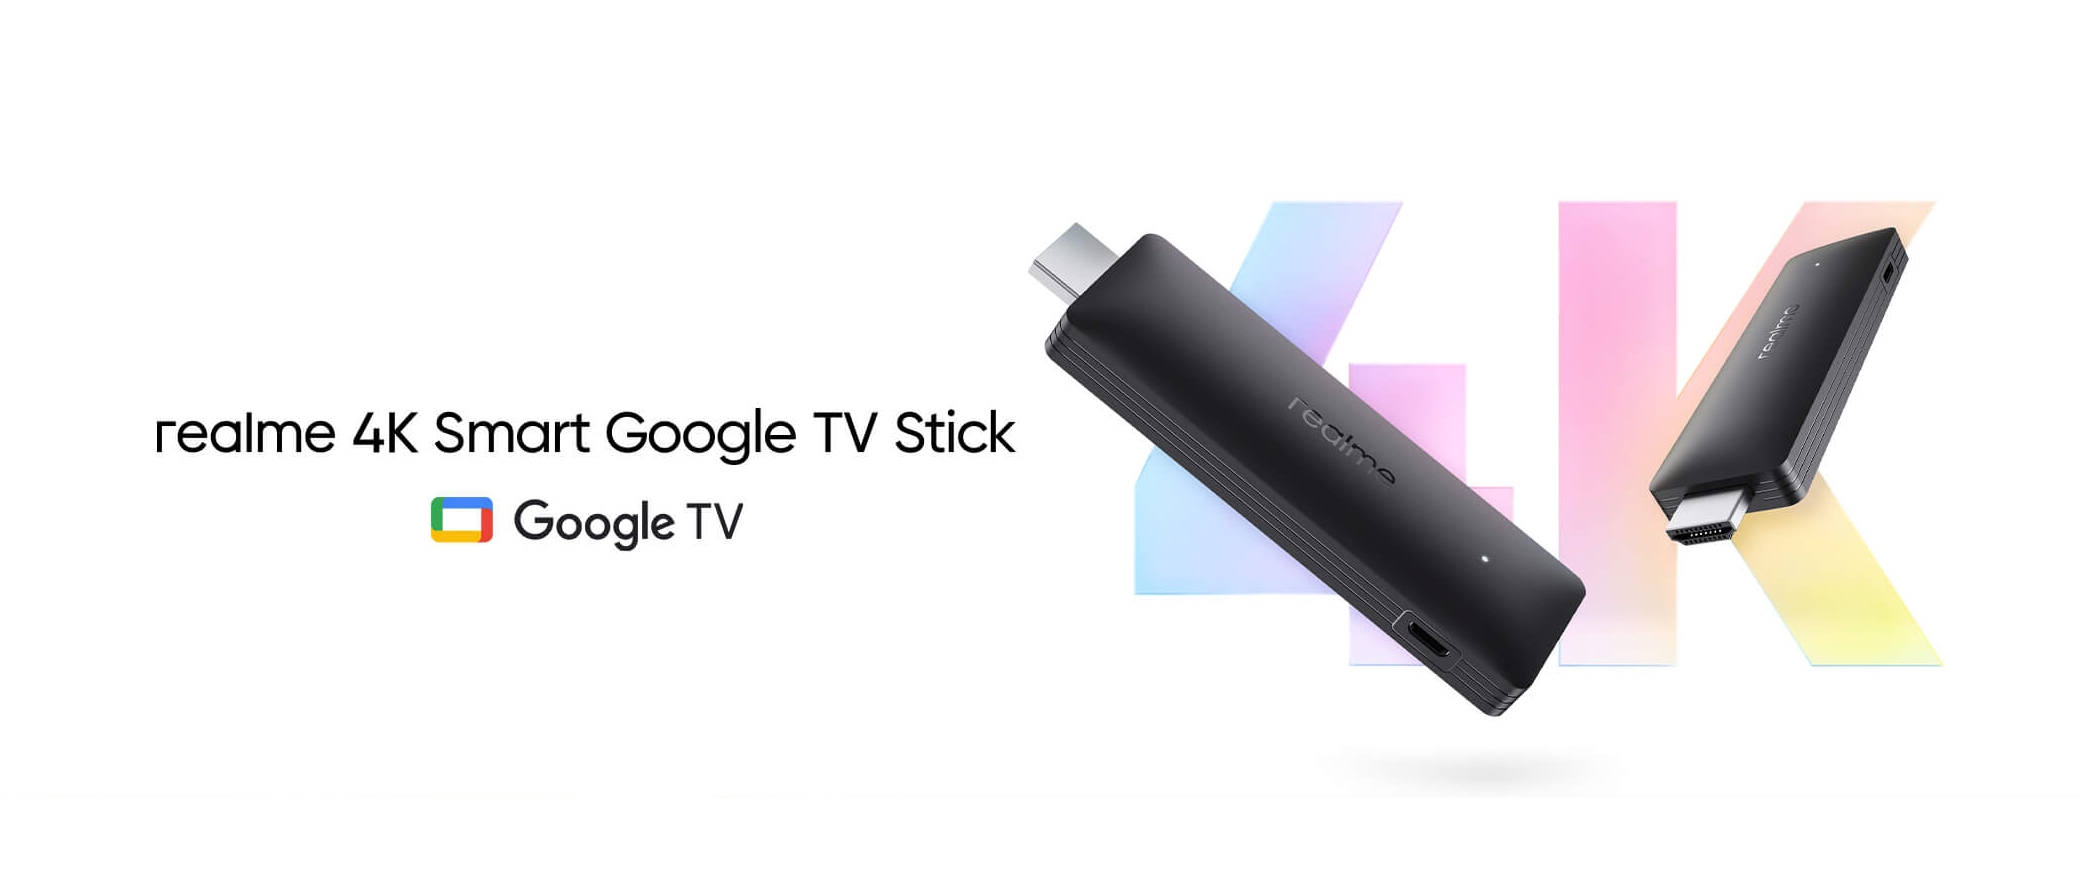 Realme revealed details about the Realme Smart TV Stick: 4K support, HDMI 2.1 and Google TV on board